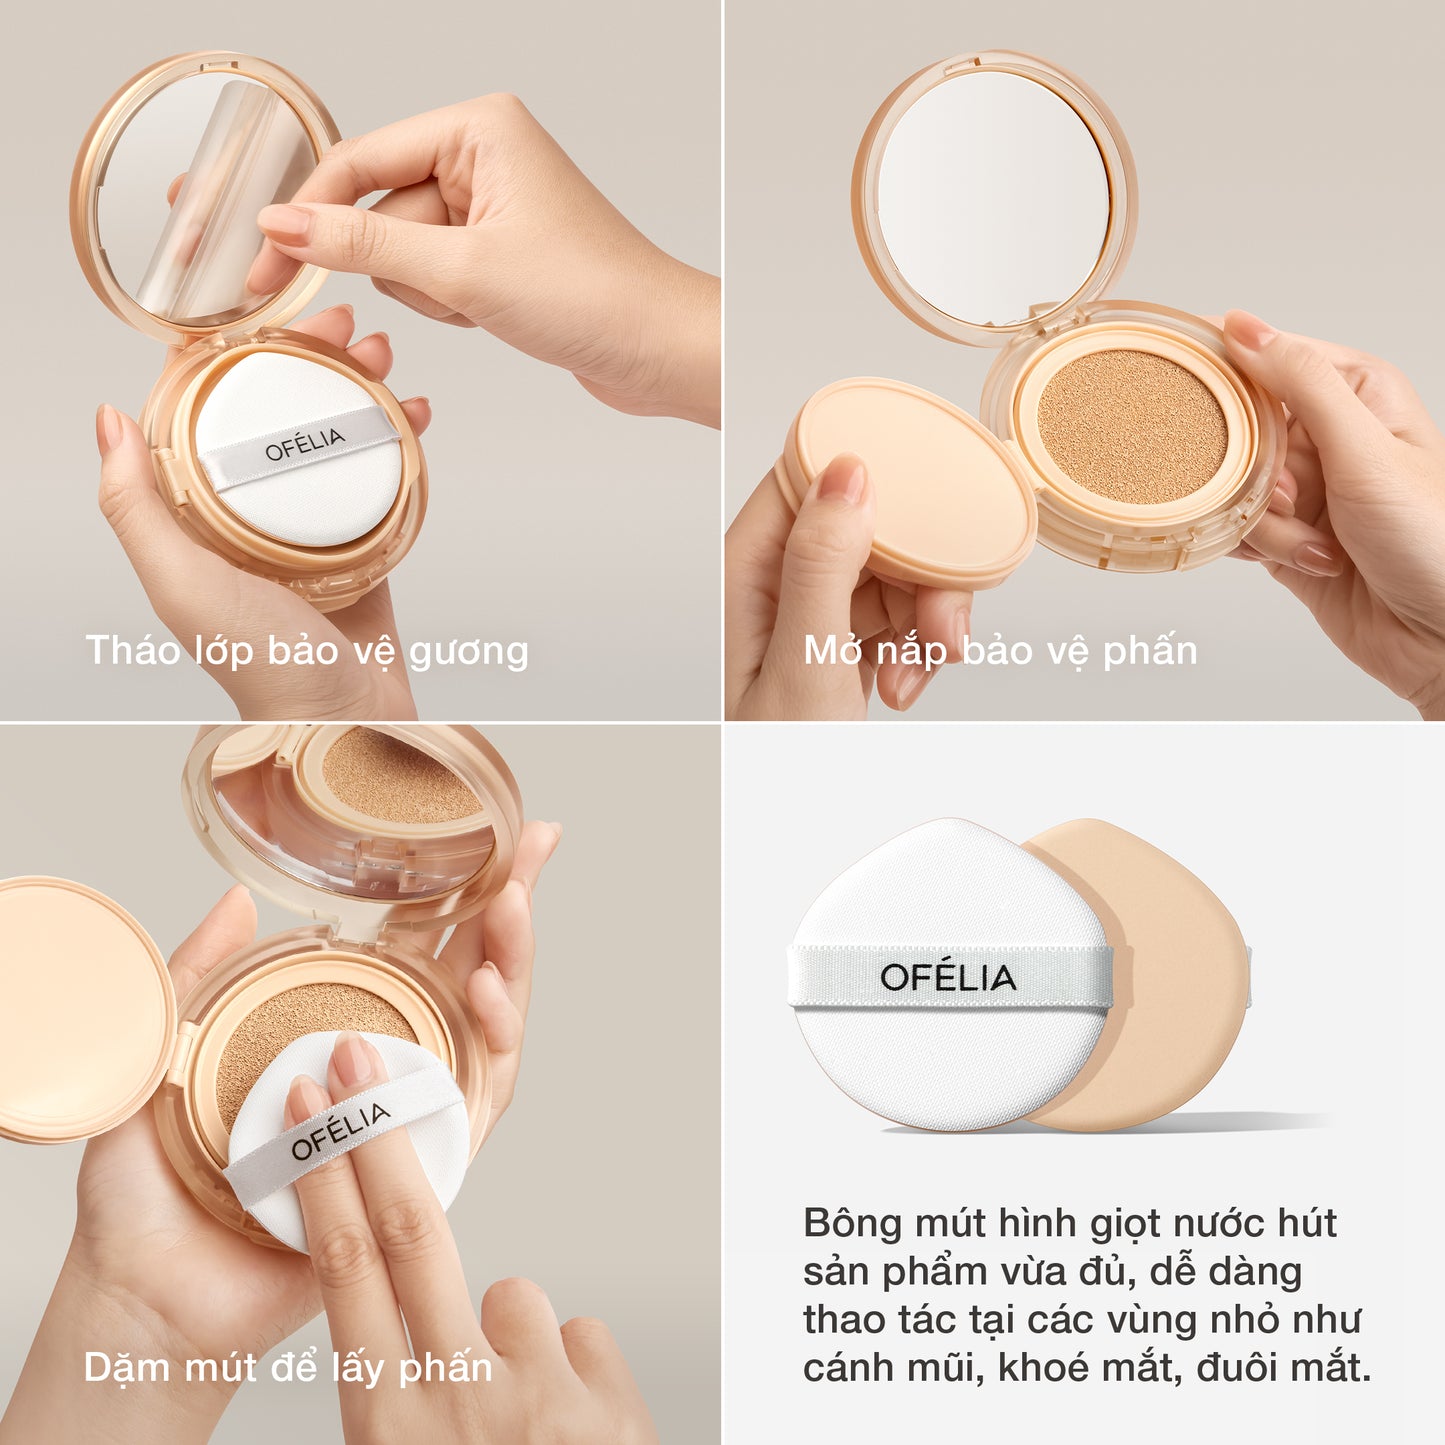 SET UNCOVERED LONGWEAR CUSHION + UNCOVERED LIP MOUSSE